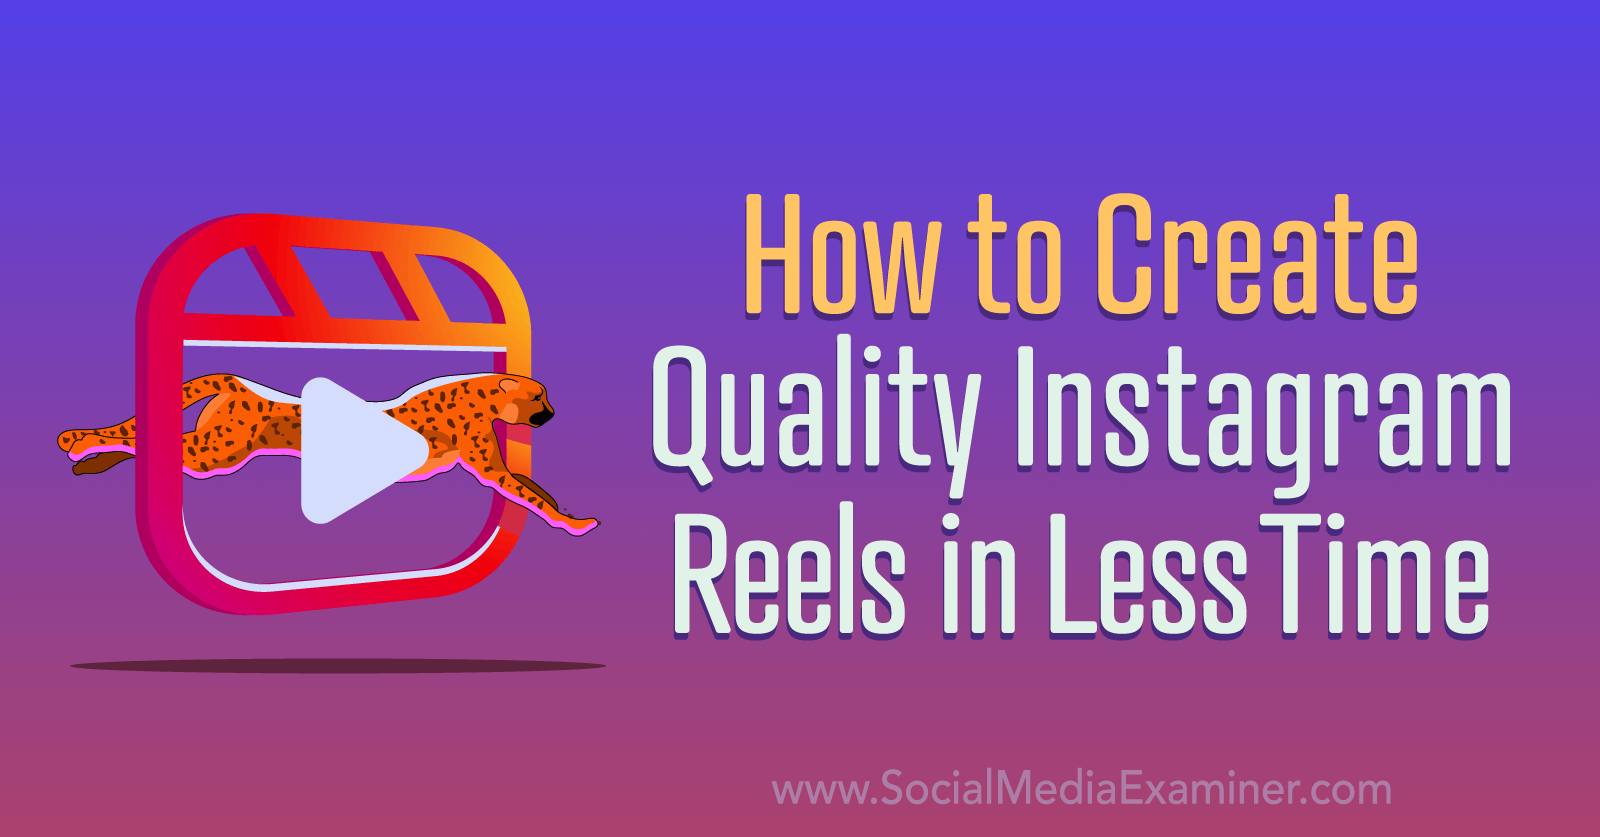 How to Create Quality Instagram Reels in Less Time by Social Media Examiner